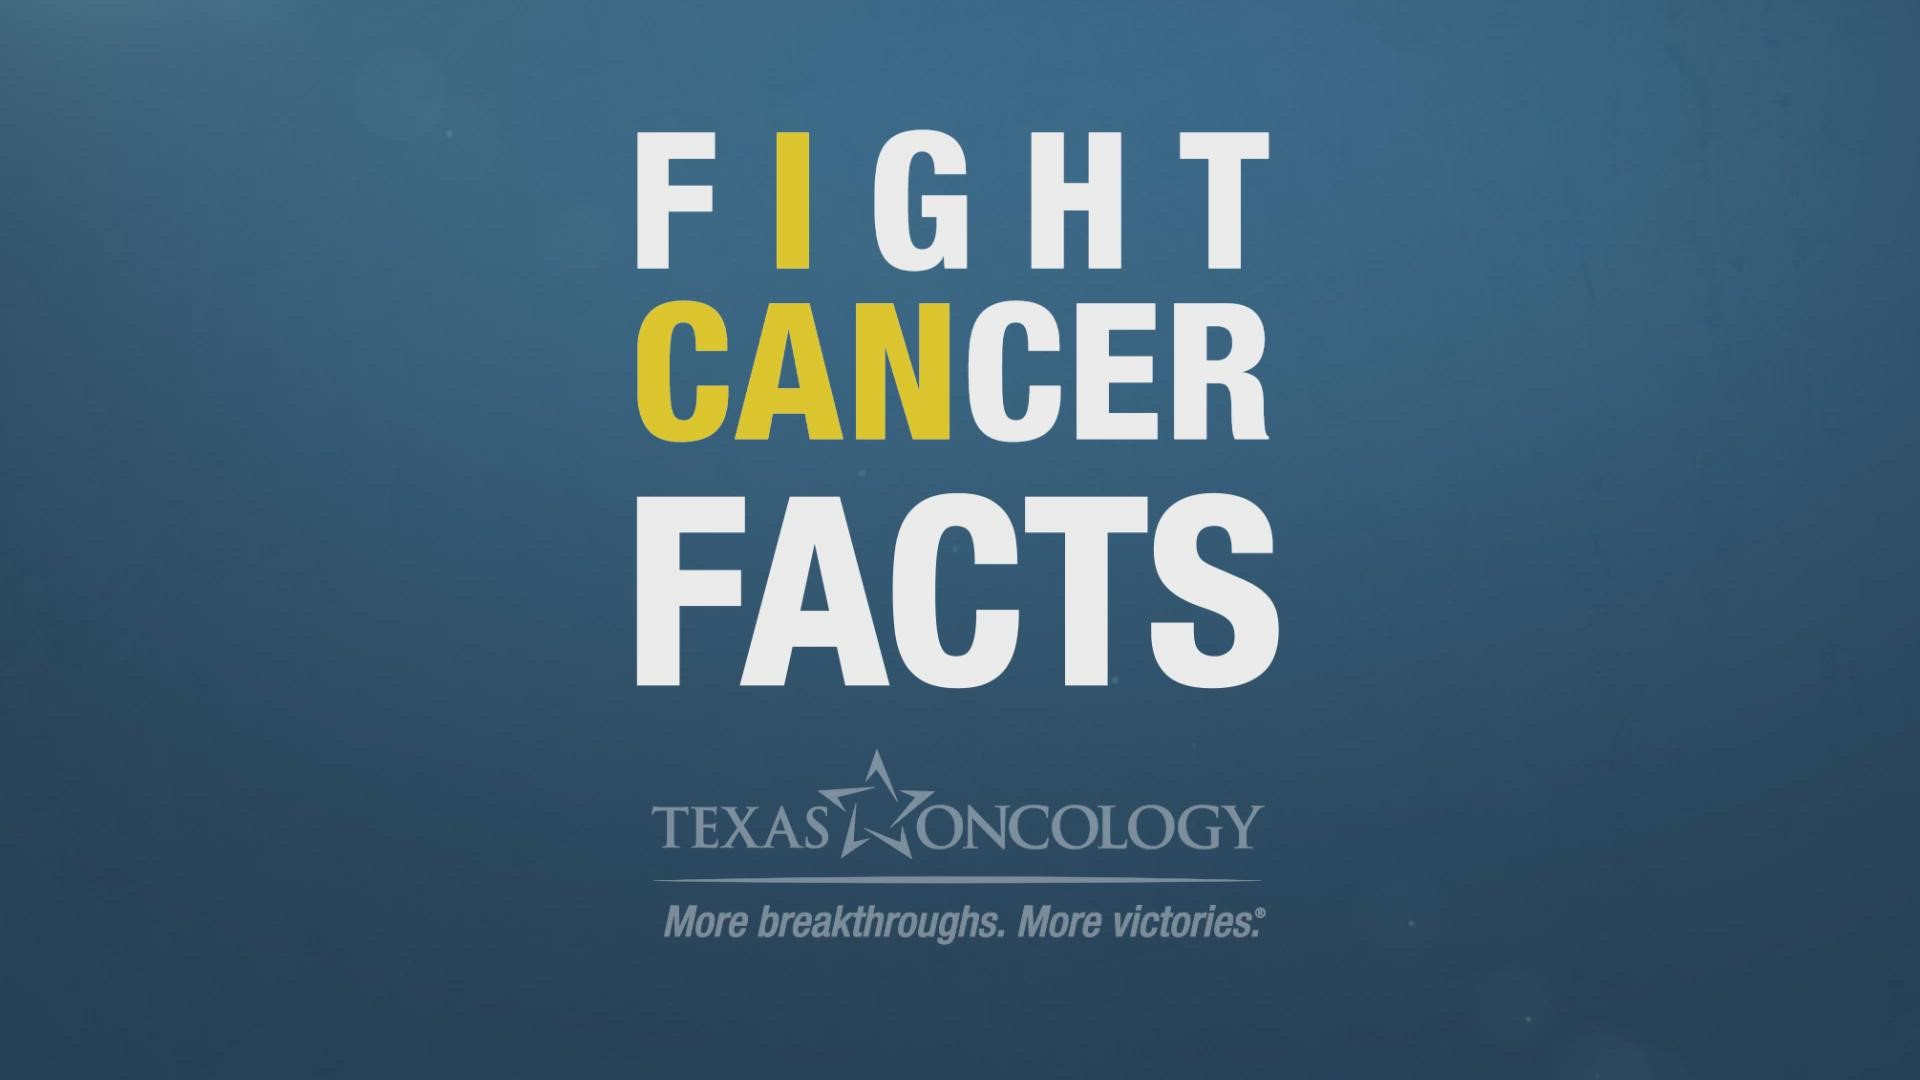 Local Texas Oncology doctor shares how you can lower your risk of skin cancer.